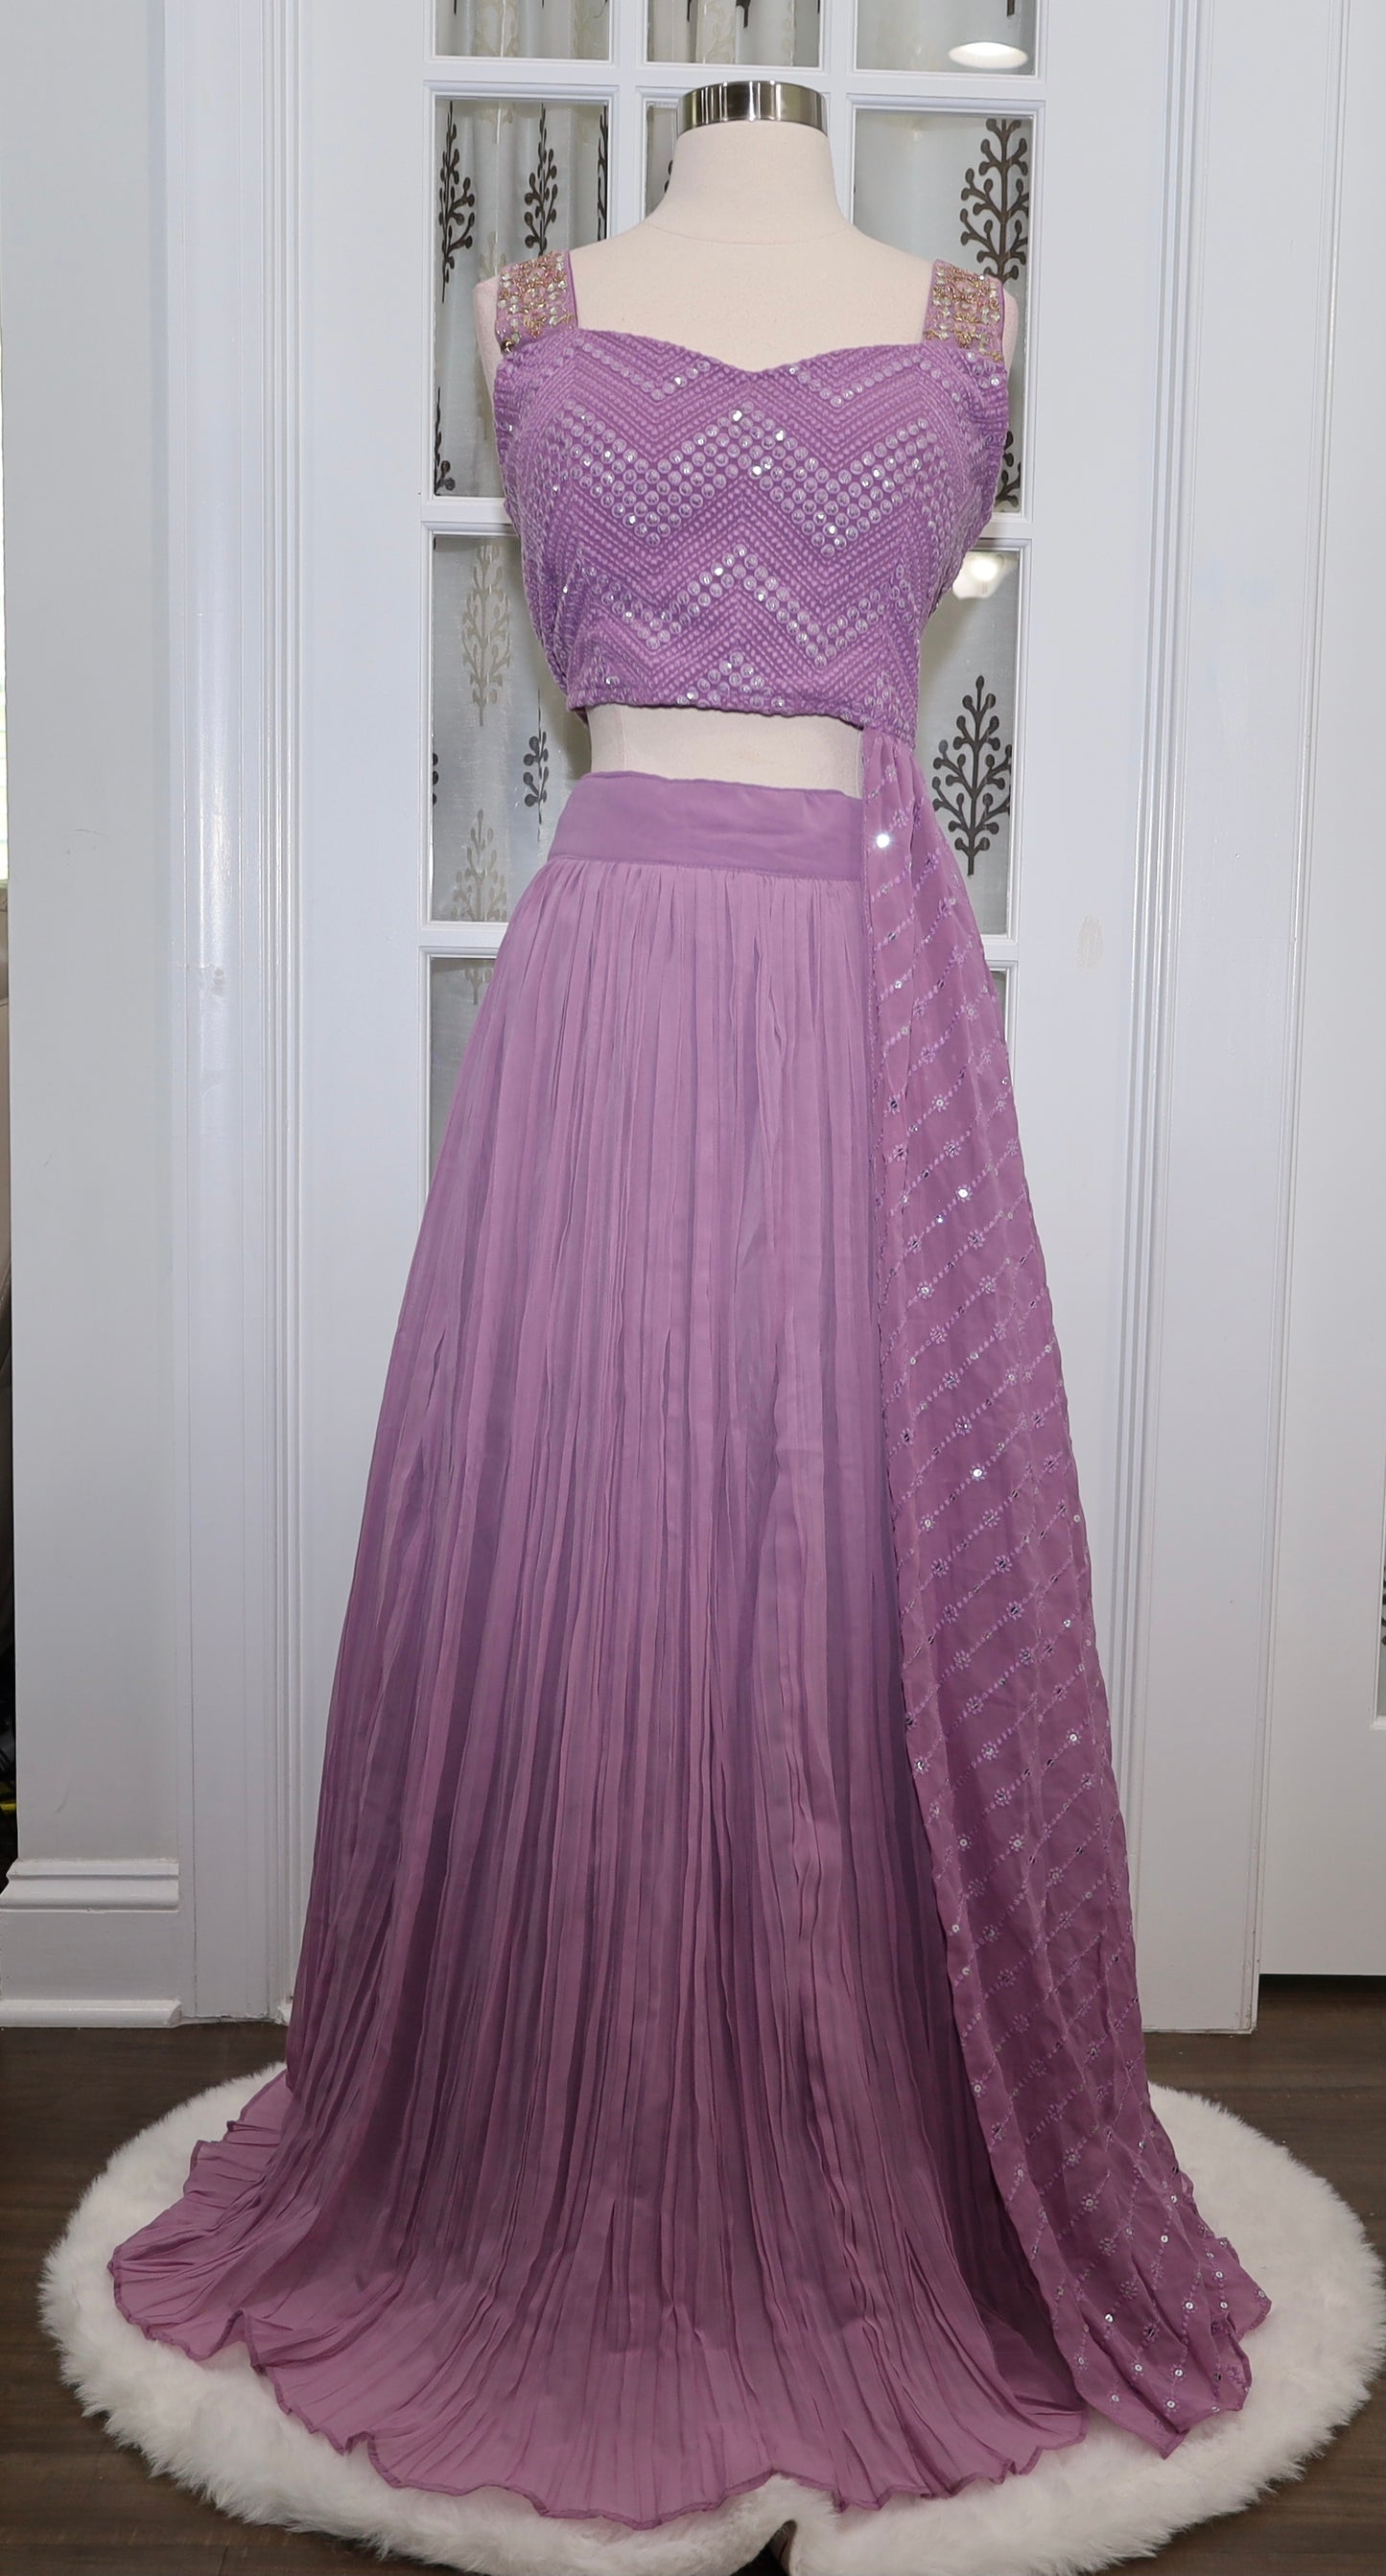 Beautiful Lavender Croptop/Lehanga set with attached trail on the side